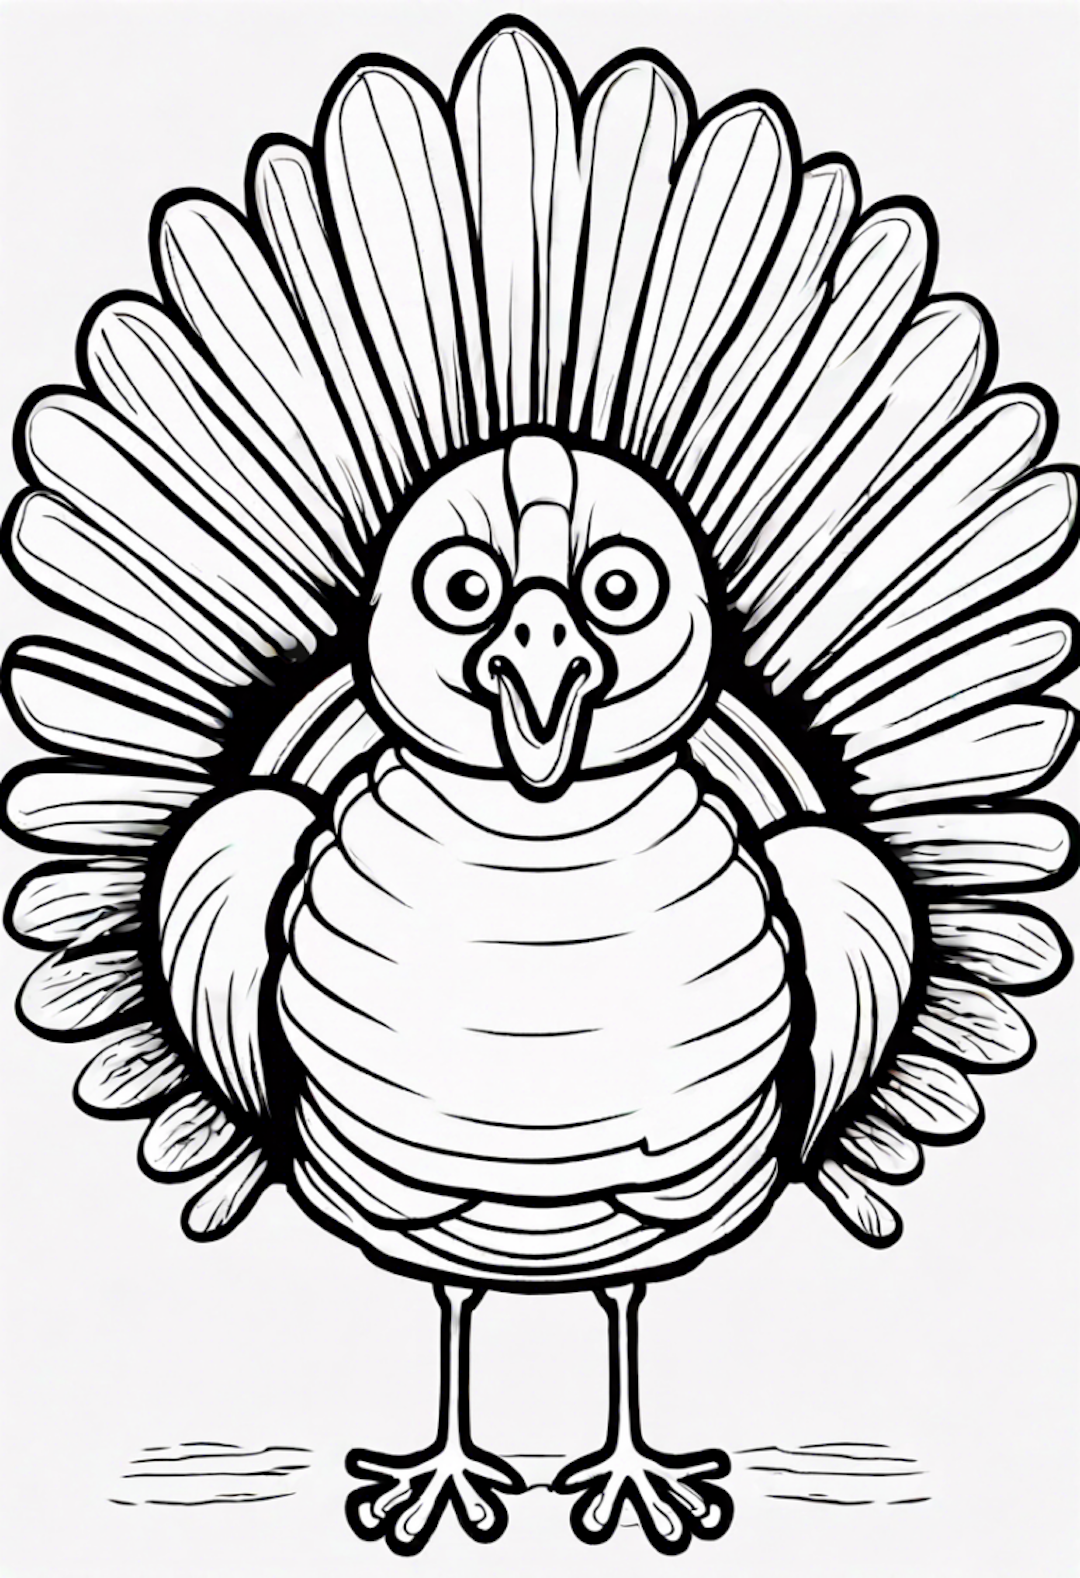 Color Tom the Turkey coloring pages